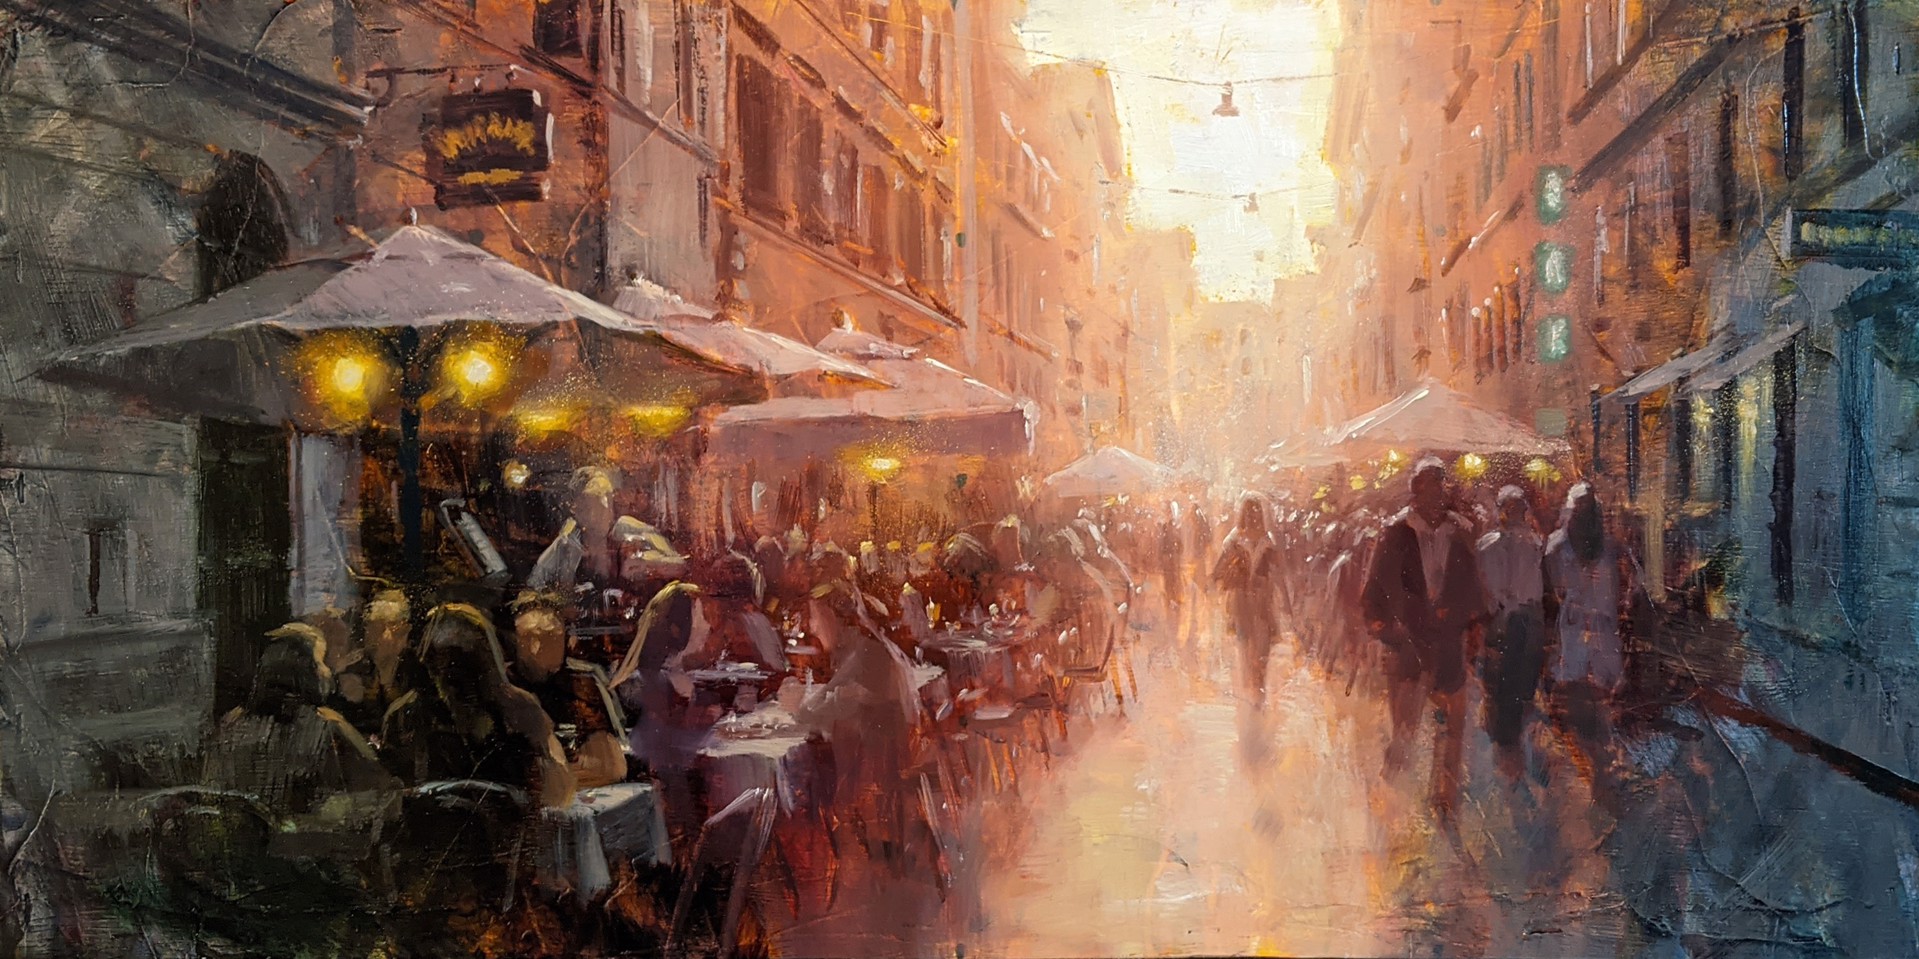 Outdoor Cafes in Rome commission by Christopher Clark